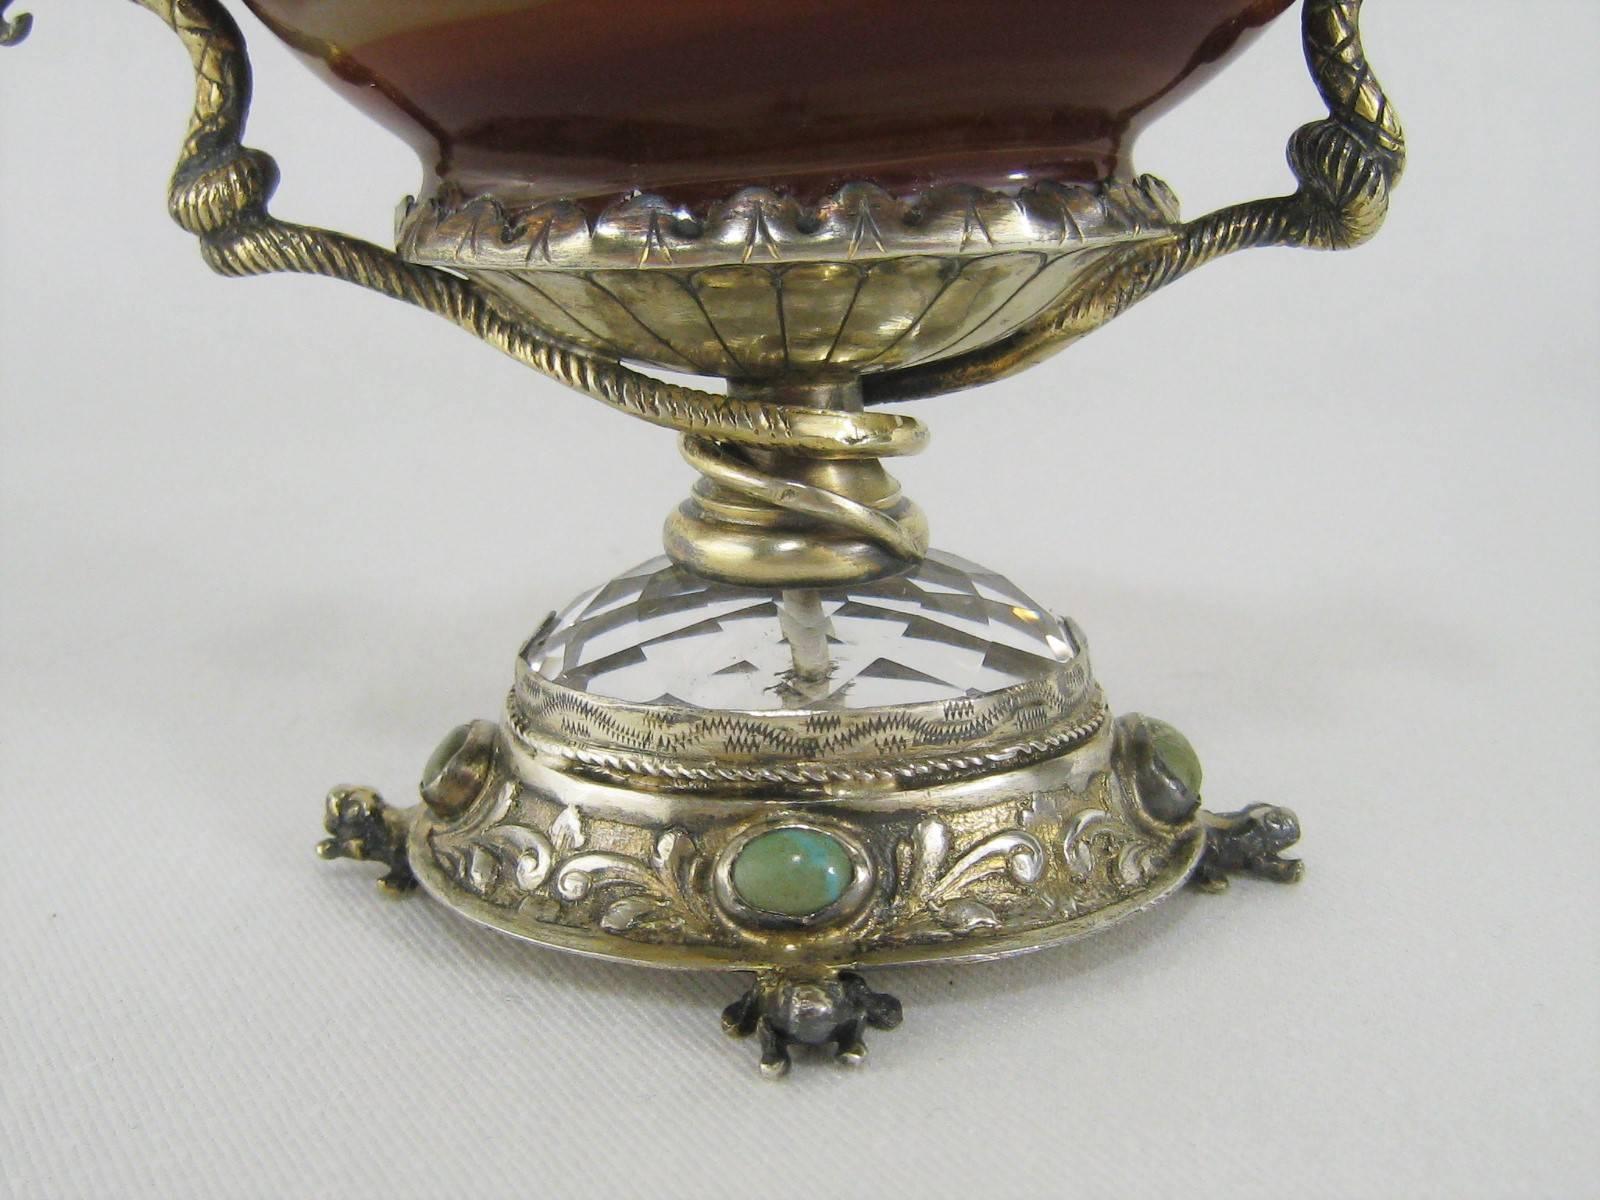 Silver Mounted Agate Pedestal Dish with Serpents and Frogs Antique Salt Cellar In Good Condition For Sale In Newtown, CT